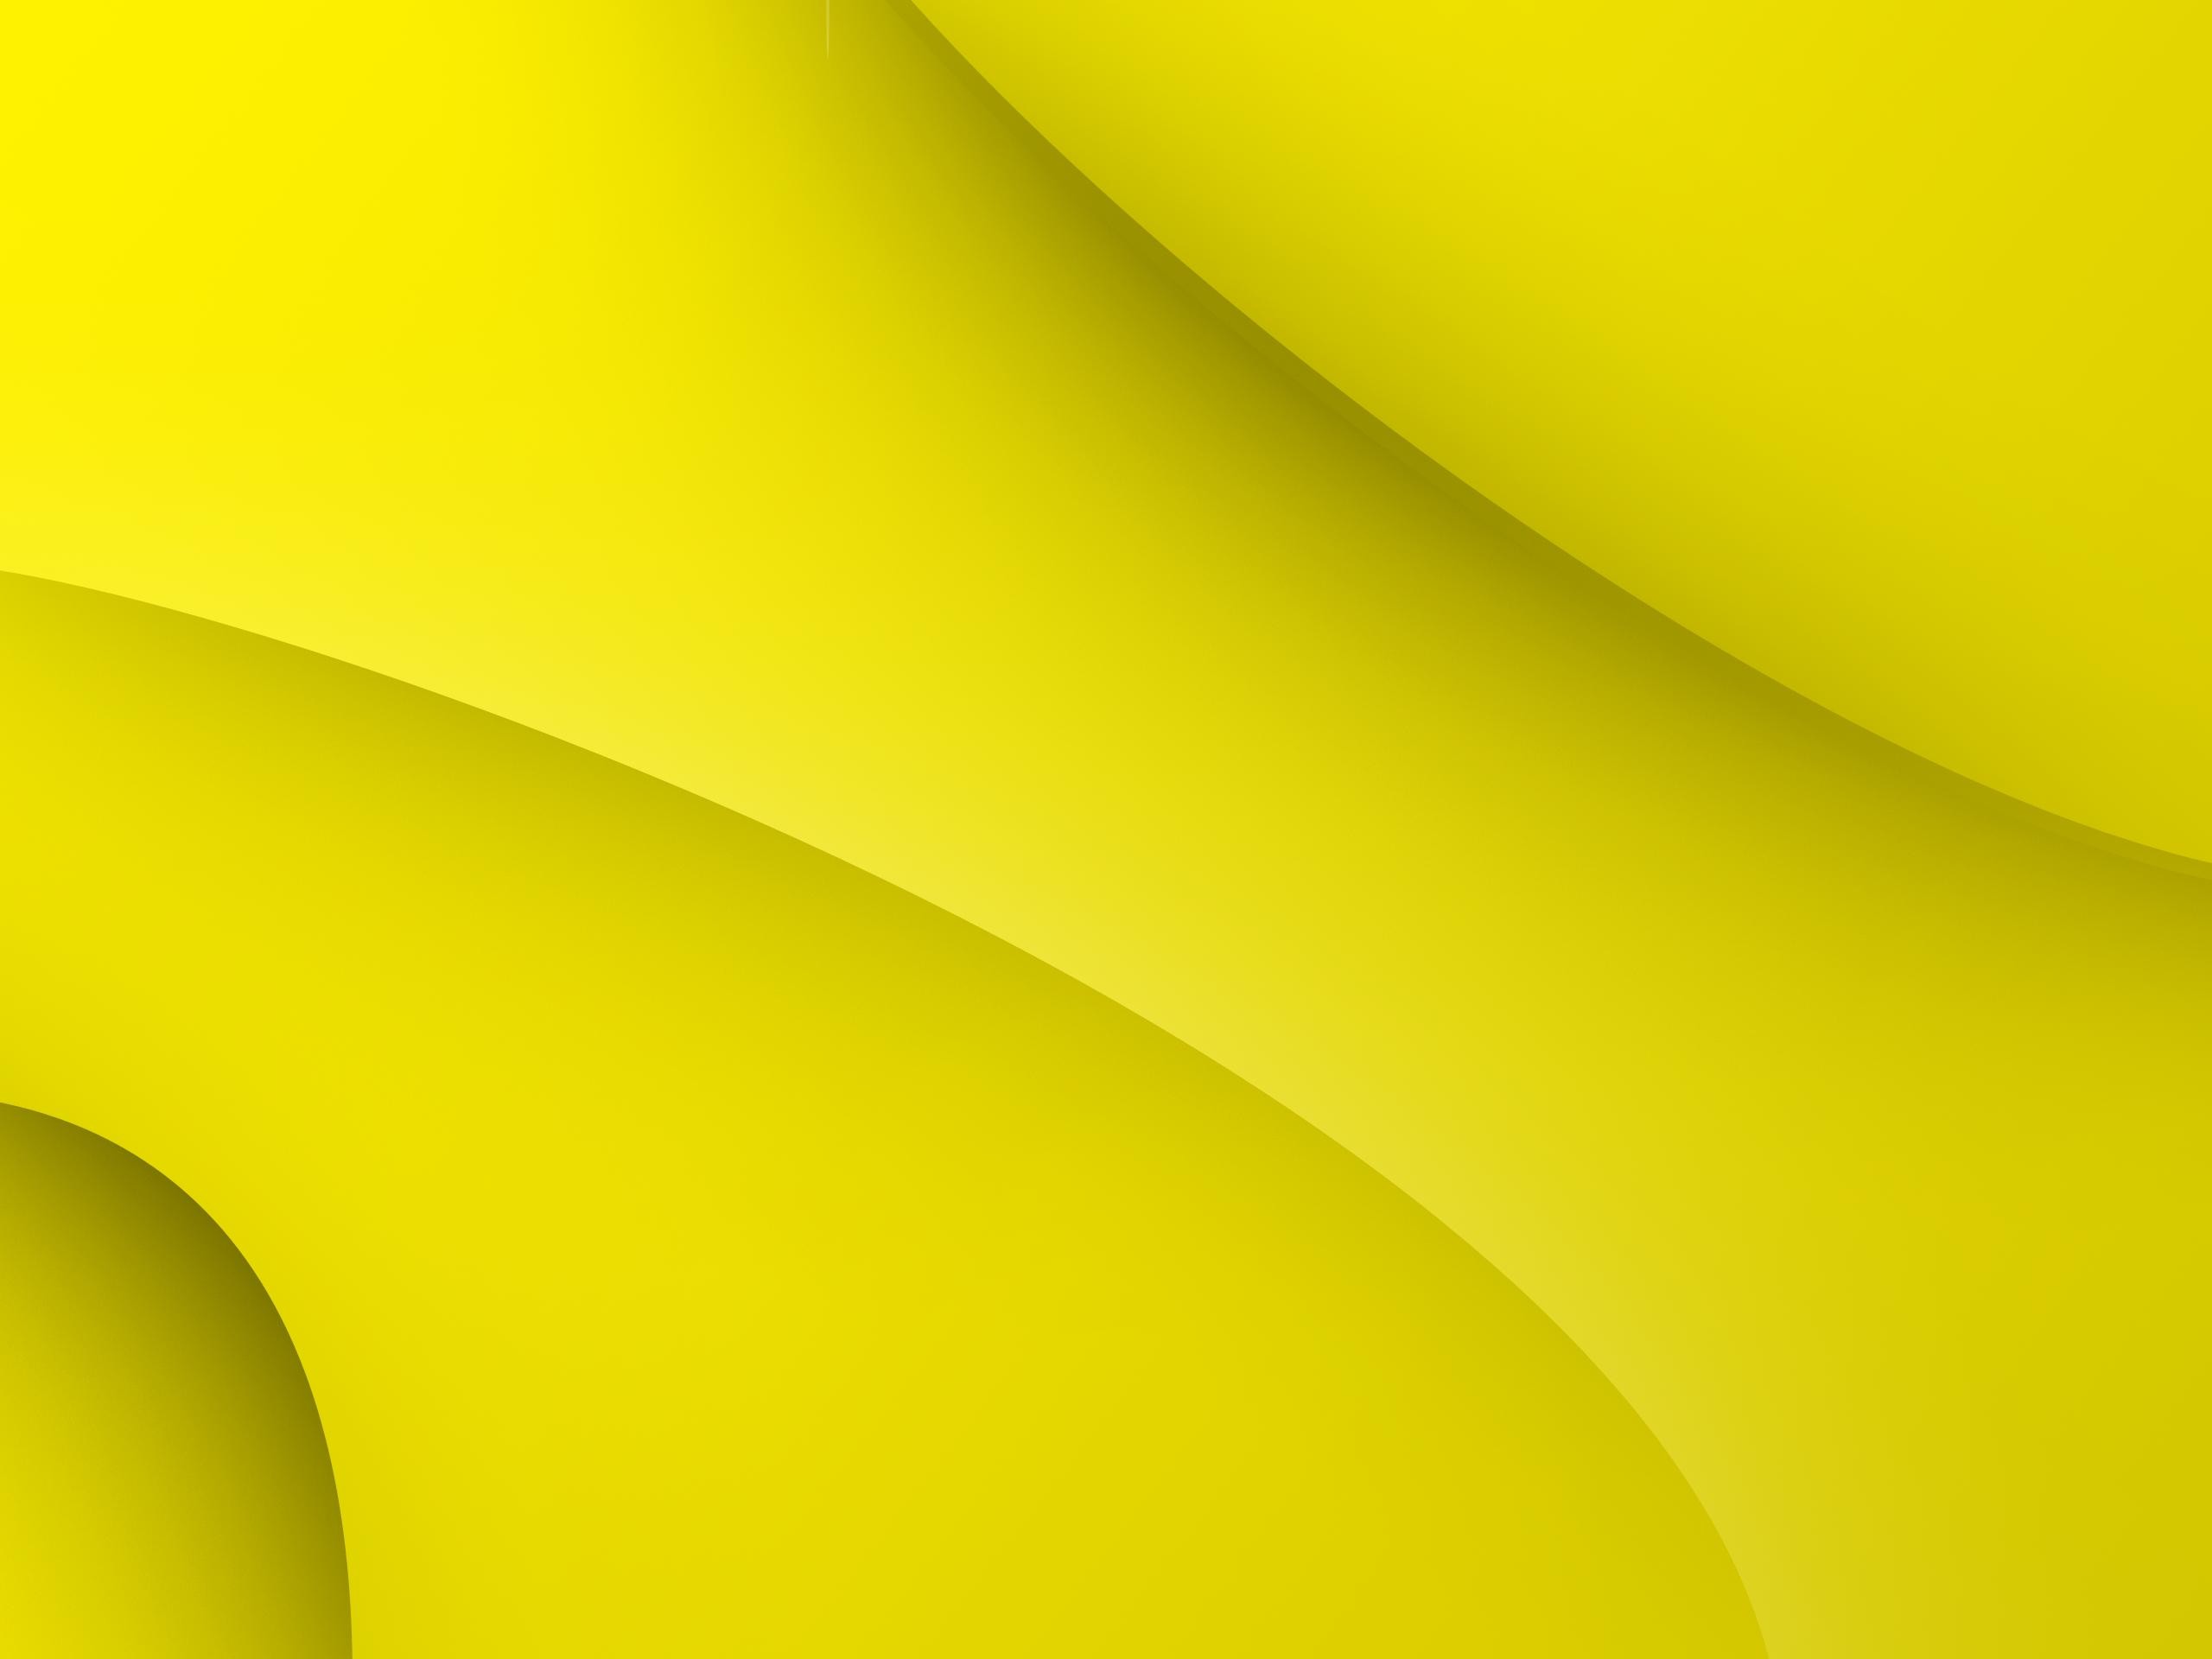 2560x1920 Wallpapers For > Plain Yellow Wallpaper